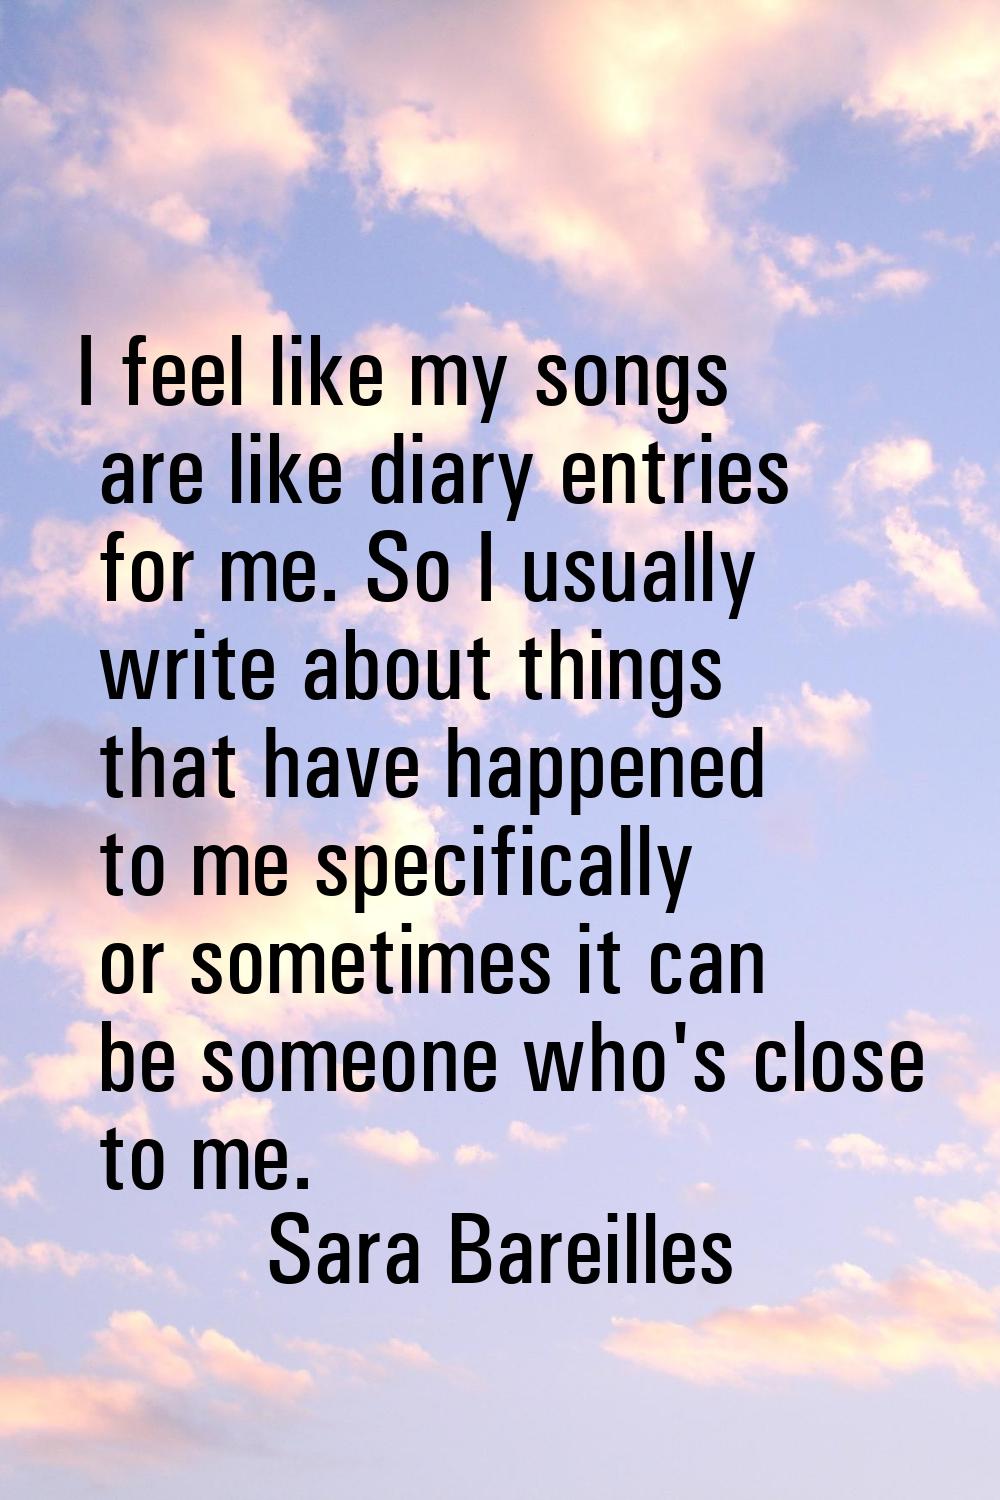 I feel like my songs are like diary entries for me. So I usually write about things that have happe